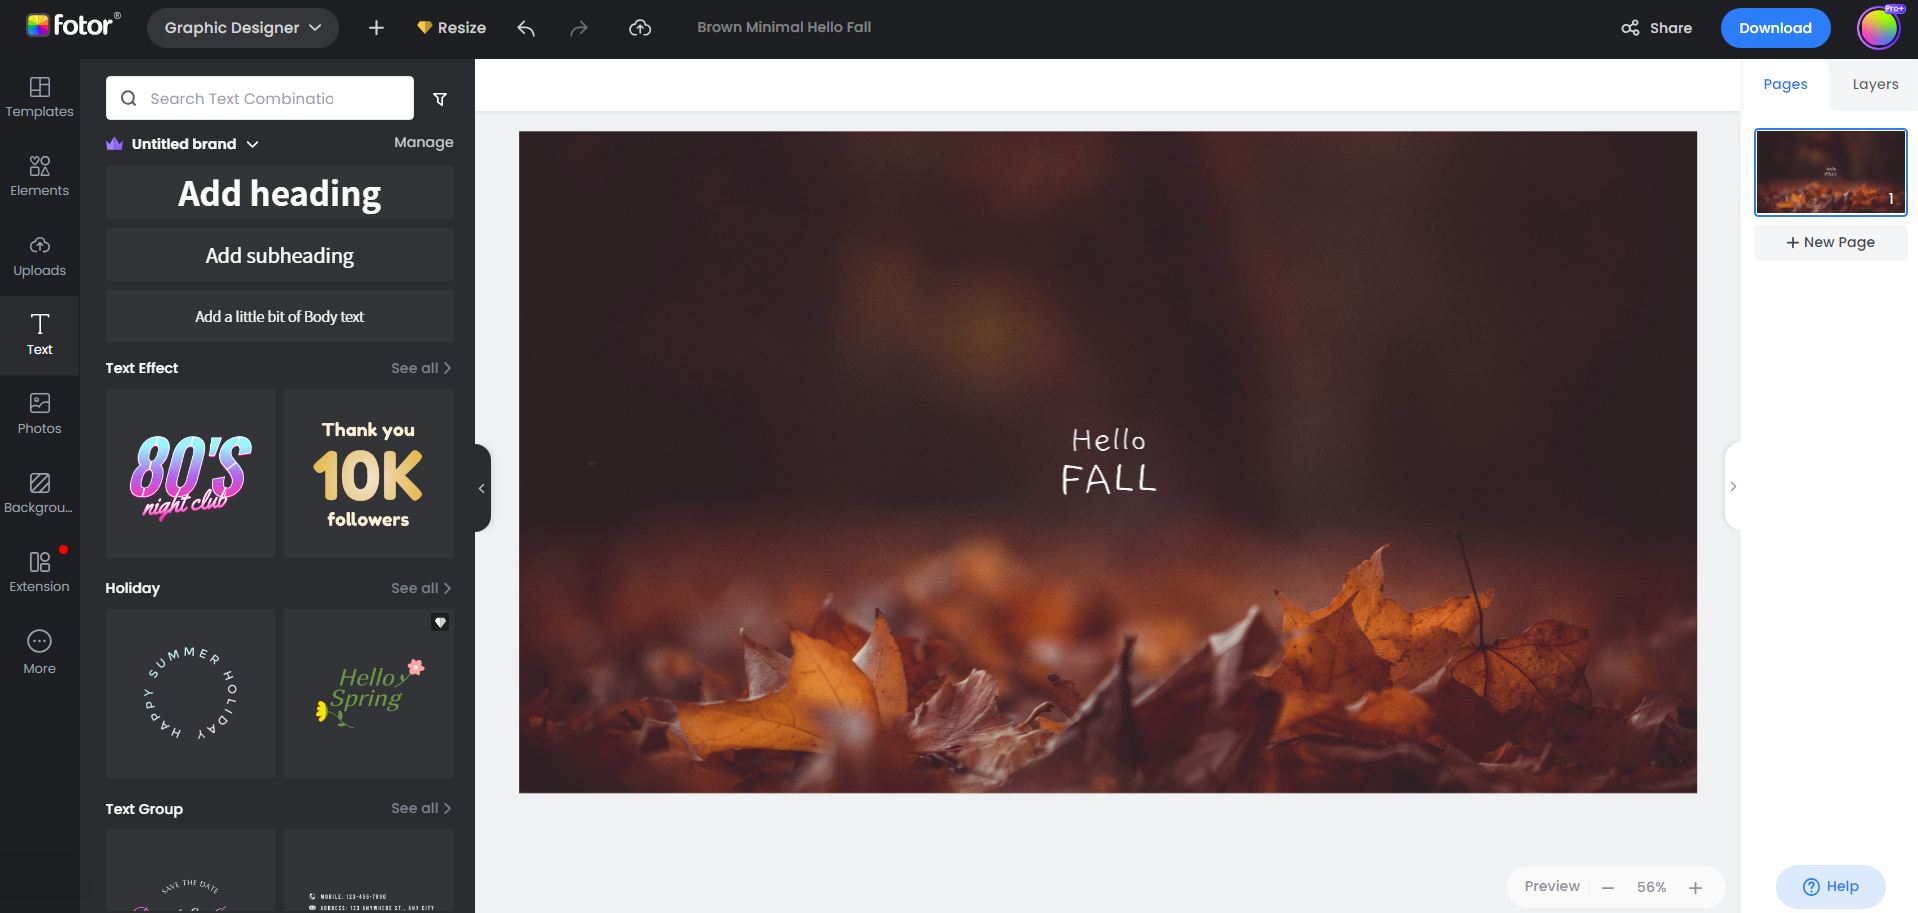 add captions to fall images using fotor online image captioner